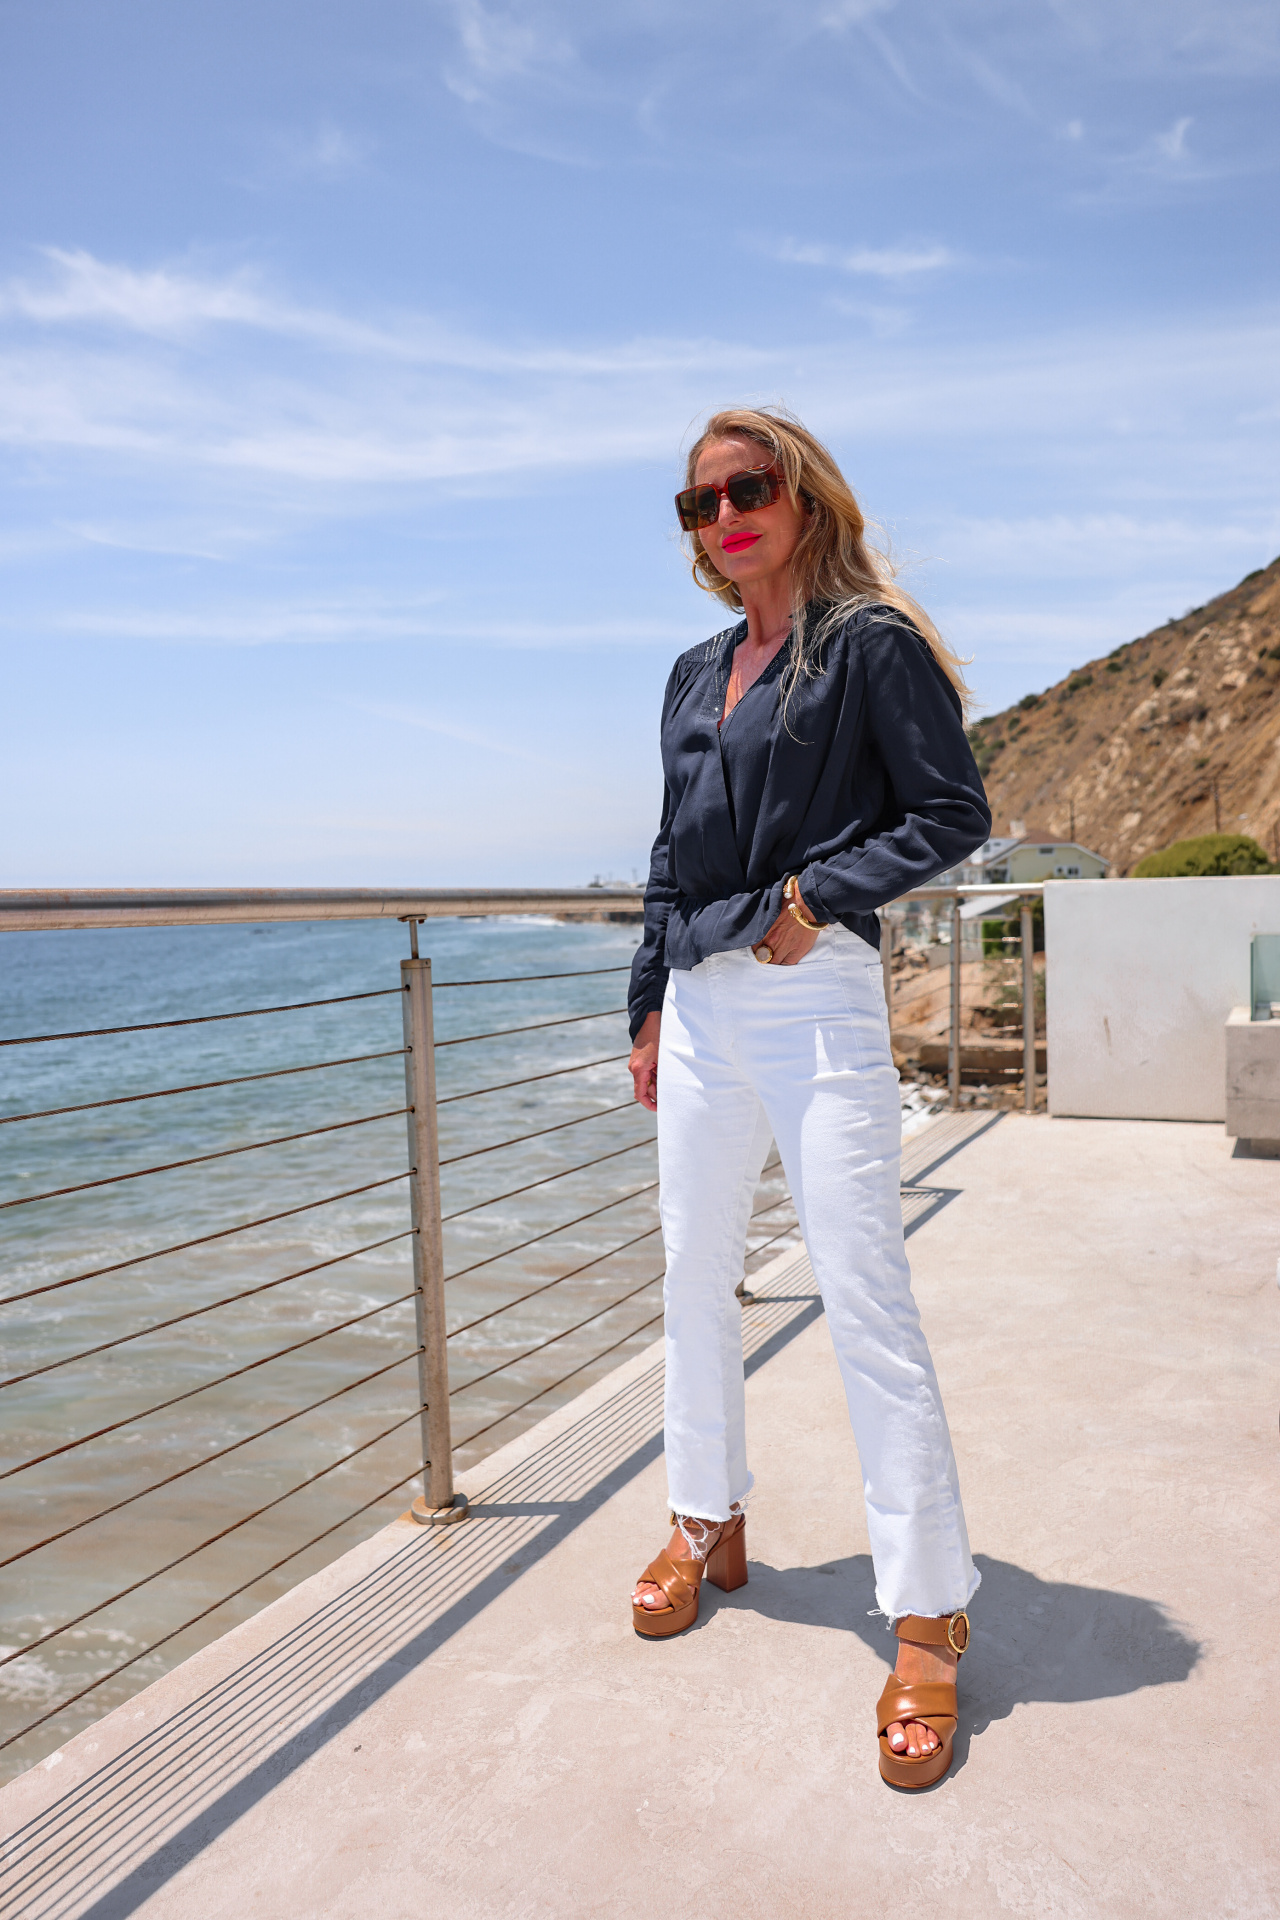 summer mom style, best summer mom outfits, summer mom outfits 2022, casual mom outfits summer, stylish mom outfits 2022, fashion for moms in their 30s, fashion for moms in their 40s, cute mom outfits, casual mom outfits, erin busbee, busbee style, fashion over 40, malibu, california, navy zadig & voltaire faux wrap front top, white mother hustler jeans, see by chloe platform heels, saint laurent square sunglasses, paco rabbane chunky gold necklace, dean davidson hoops, How to wear white jeans, high waisted white jeans, how to wear white jeans in summer, white jeans for women, what to wear with white jeans